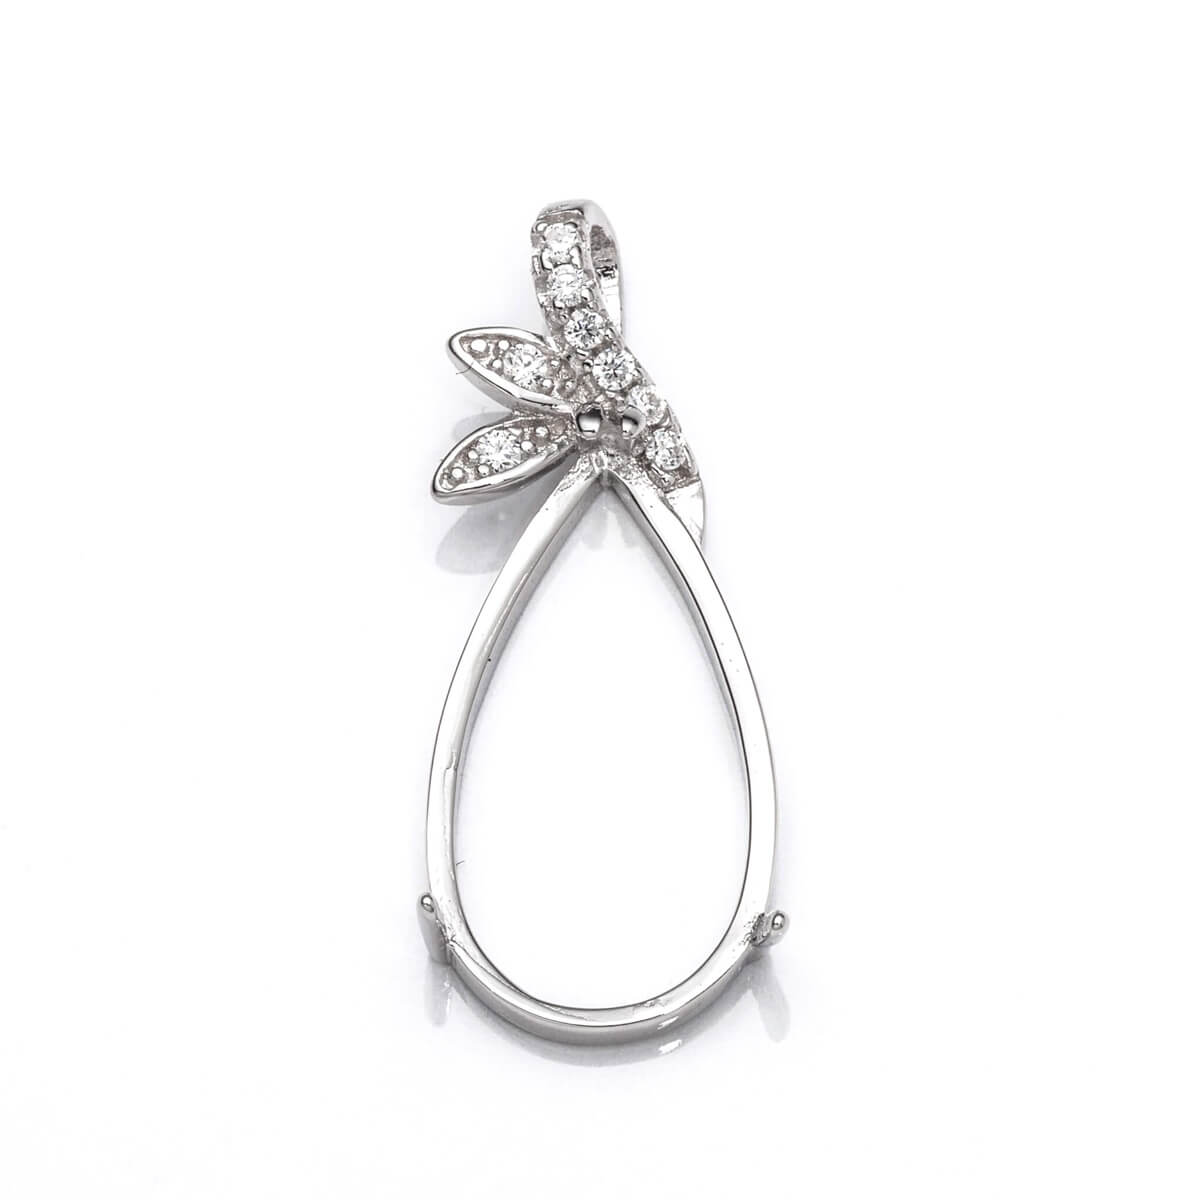 Pear Pendant with Cubic Zirconia Inlays and Pear Shape Mounting in Sterling Silver 10x17mm